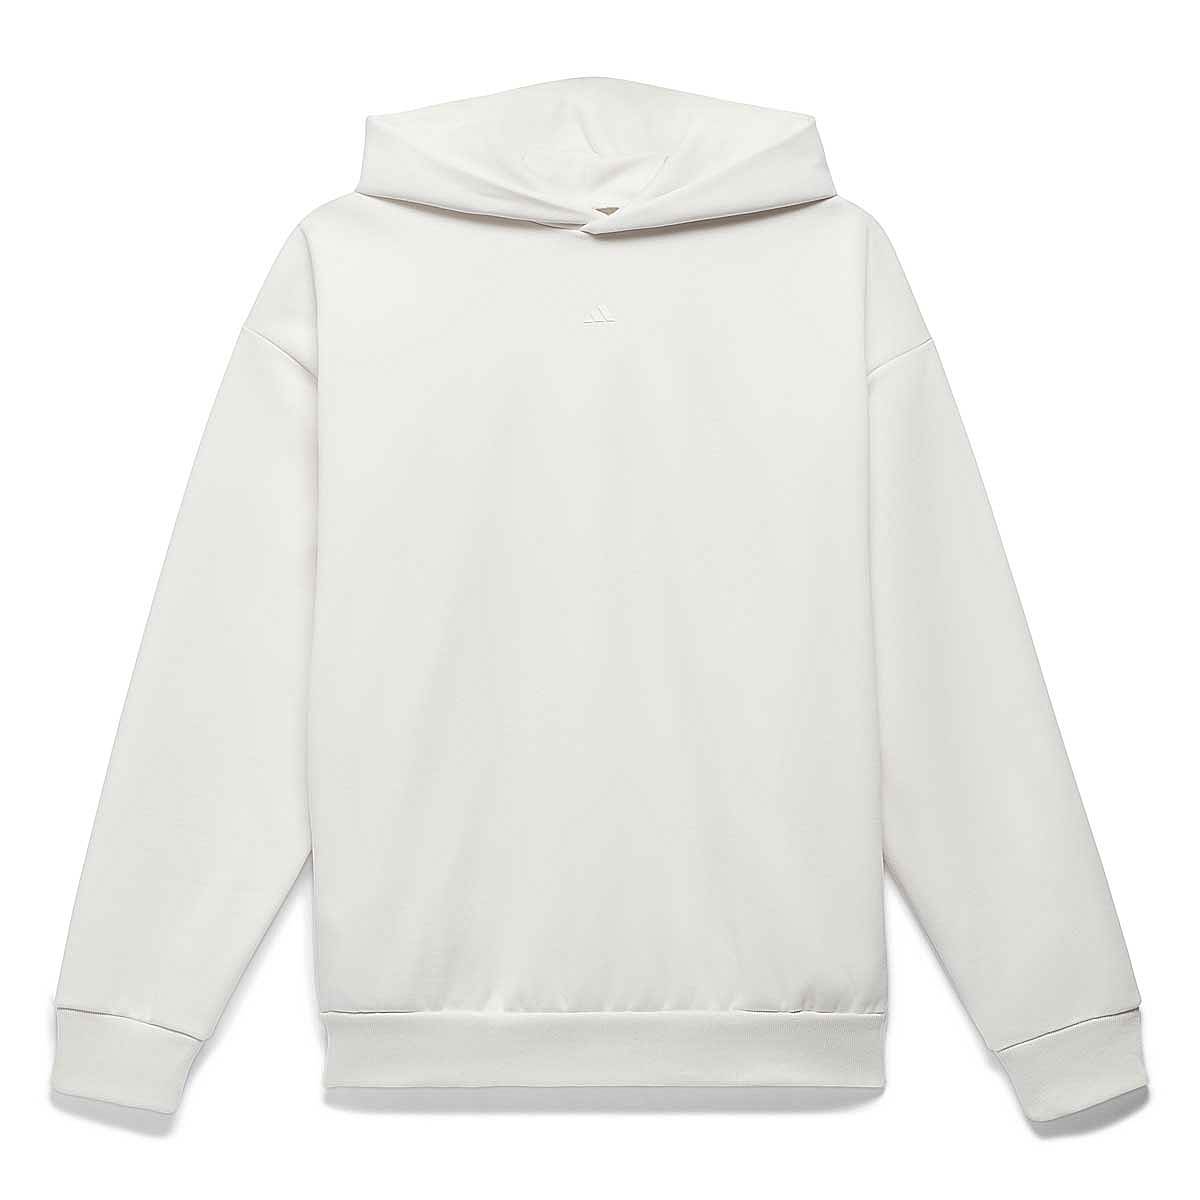 Image of Adidas Chapter 1 Hoody, White